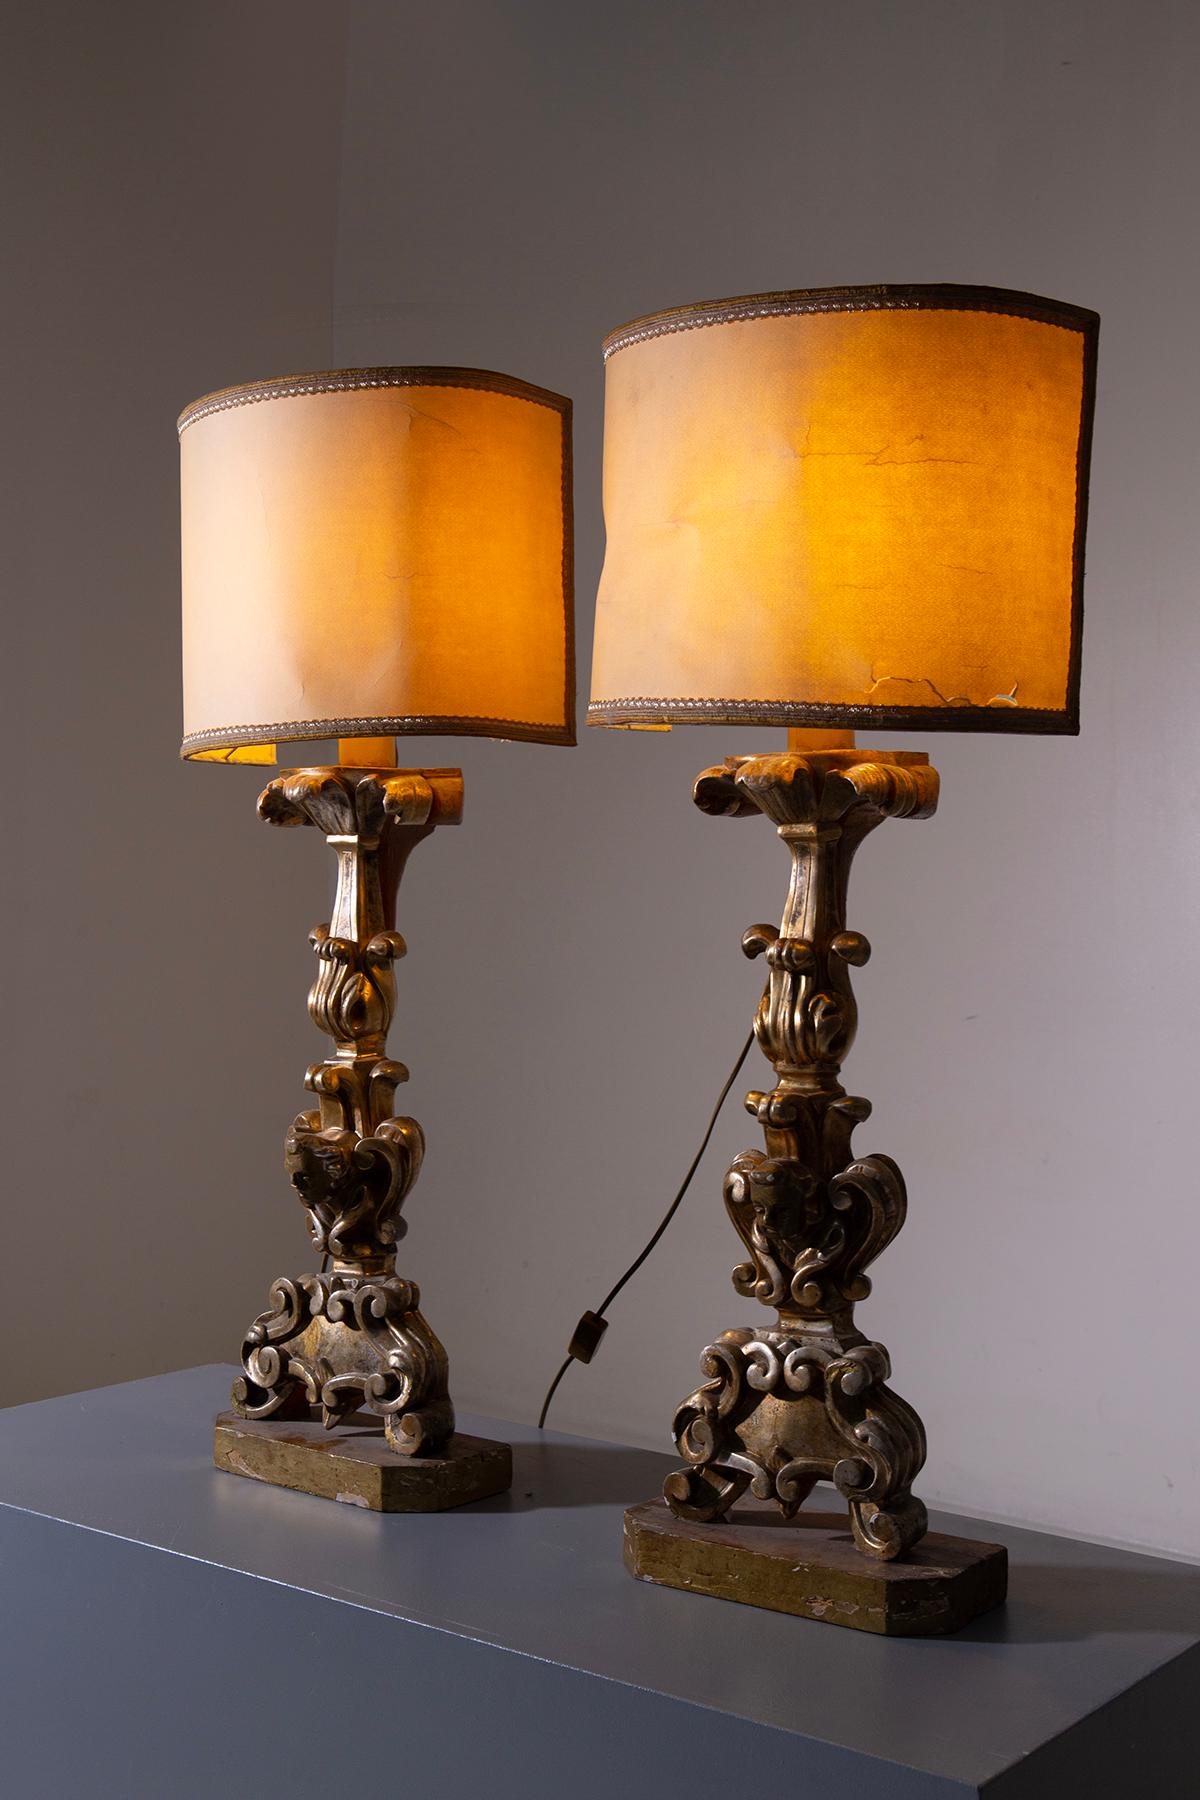 This exquisite pair of antique wooden lamps, masterfully gilded by the renowned 19th-century artisan Pietro Cipriani, embodies the quintessence of classical elegance. Crafted entirely from wood, each lamp has been meticulously carved by hand, a